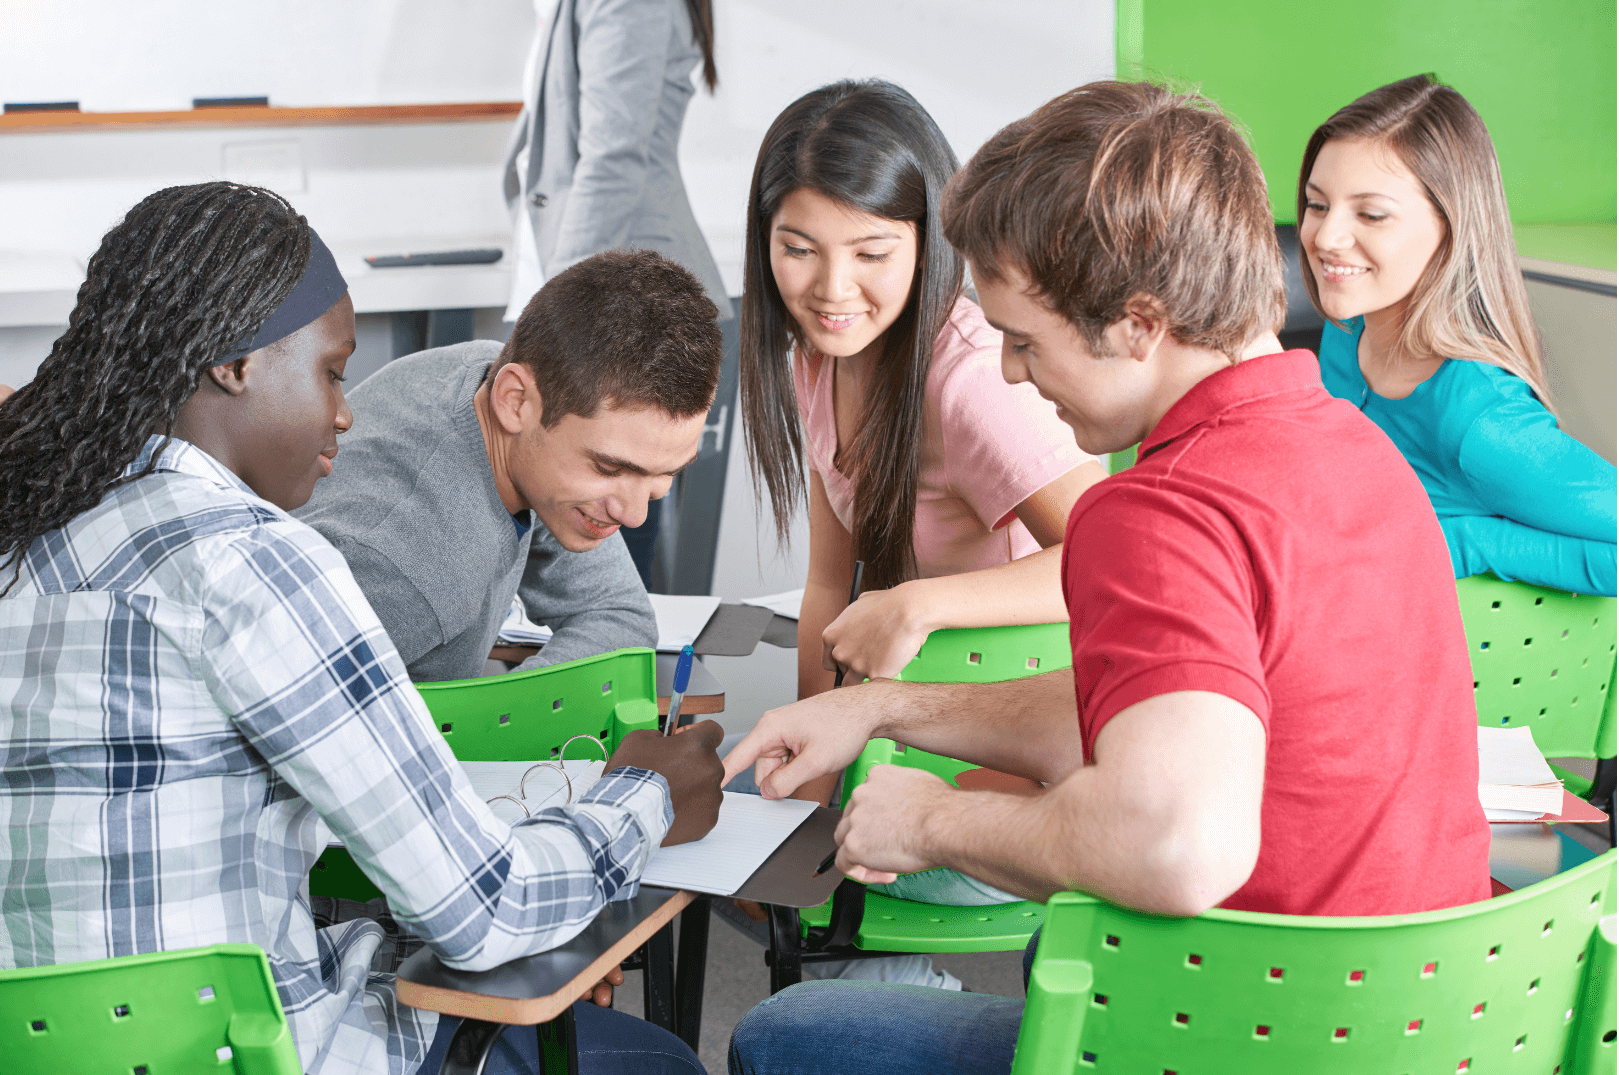 encouraging collaboration as one of the classroom management strategies for new teachers